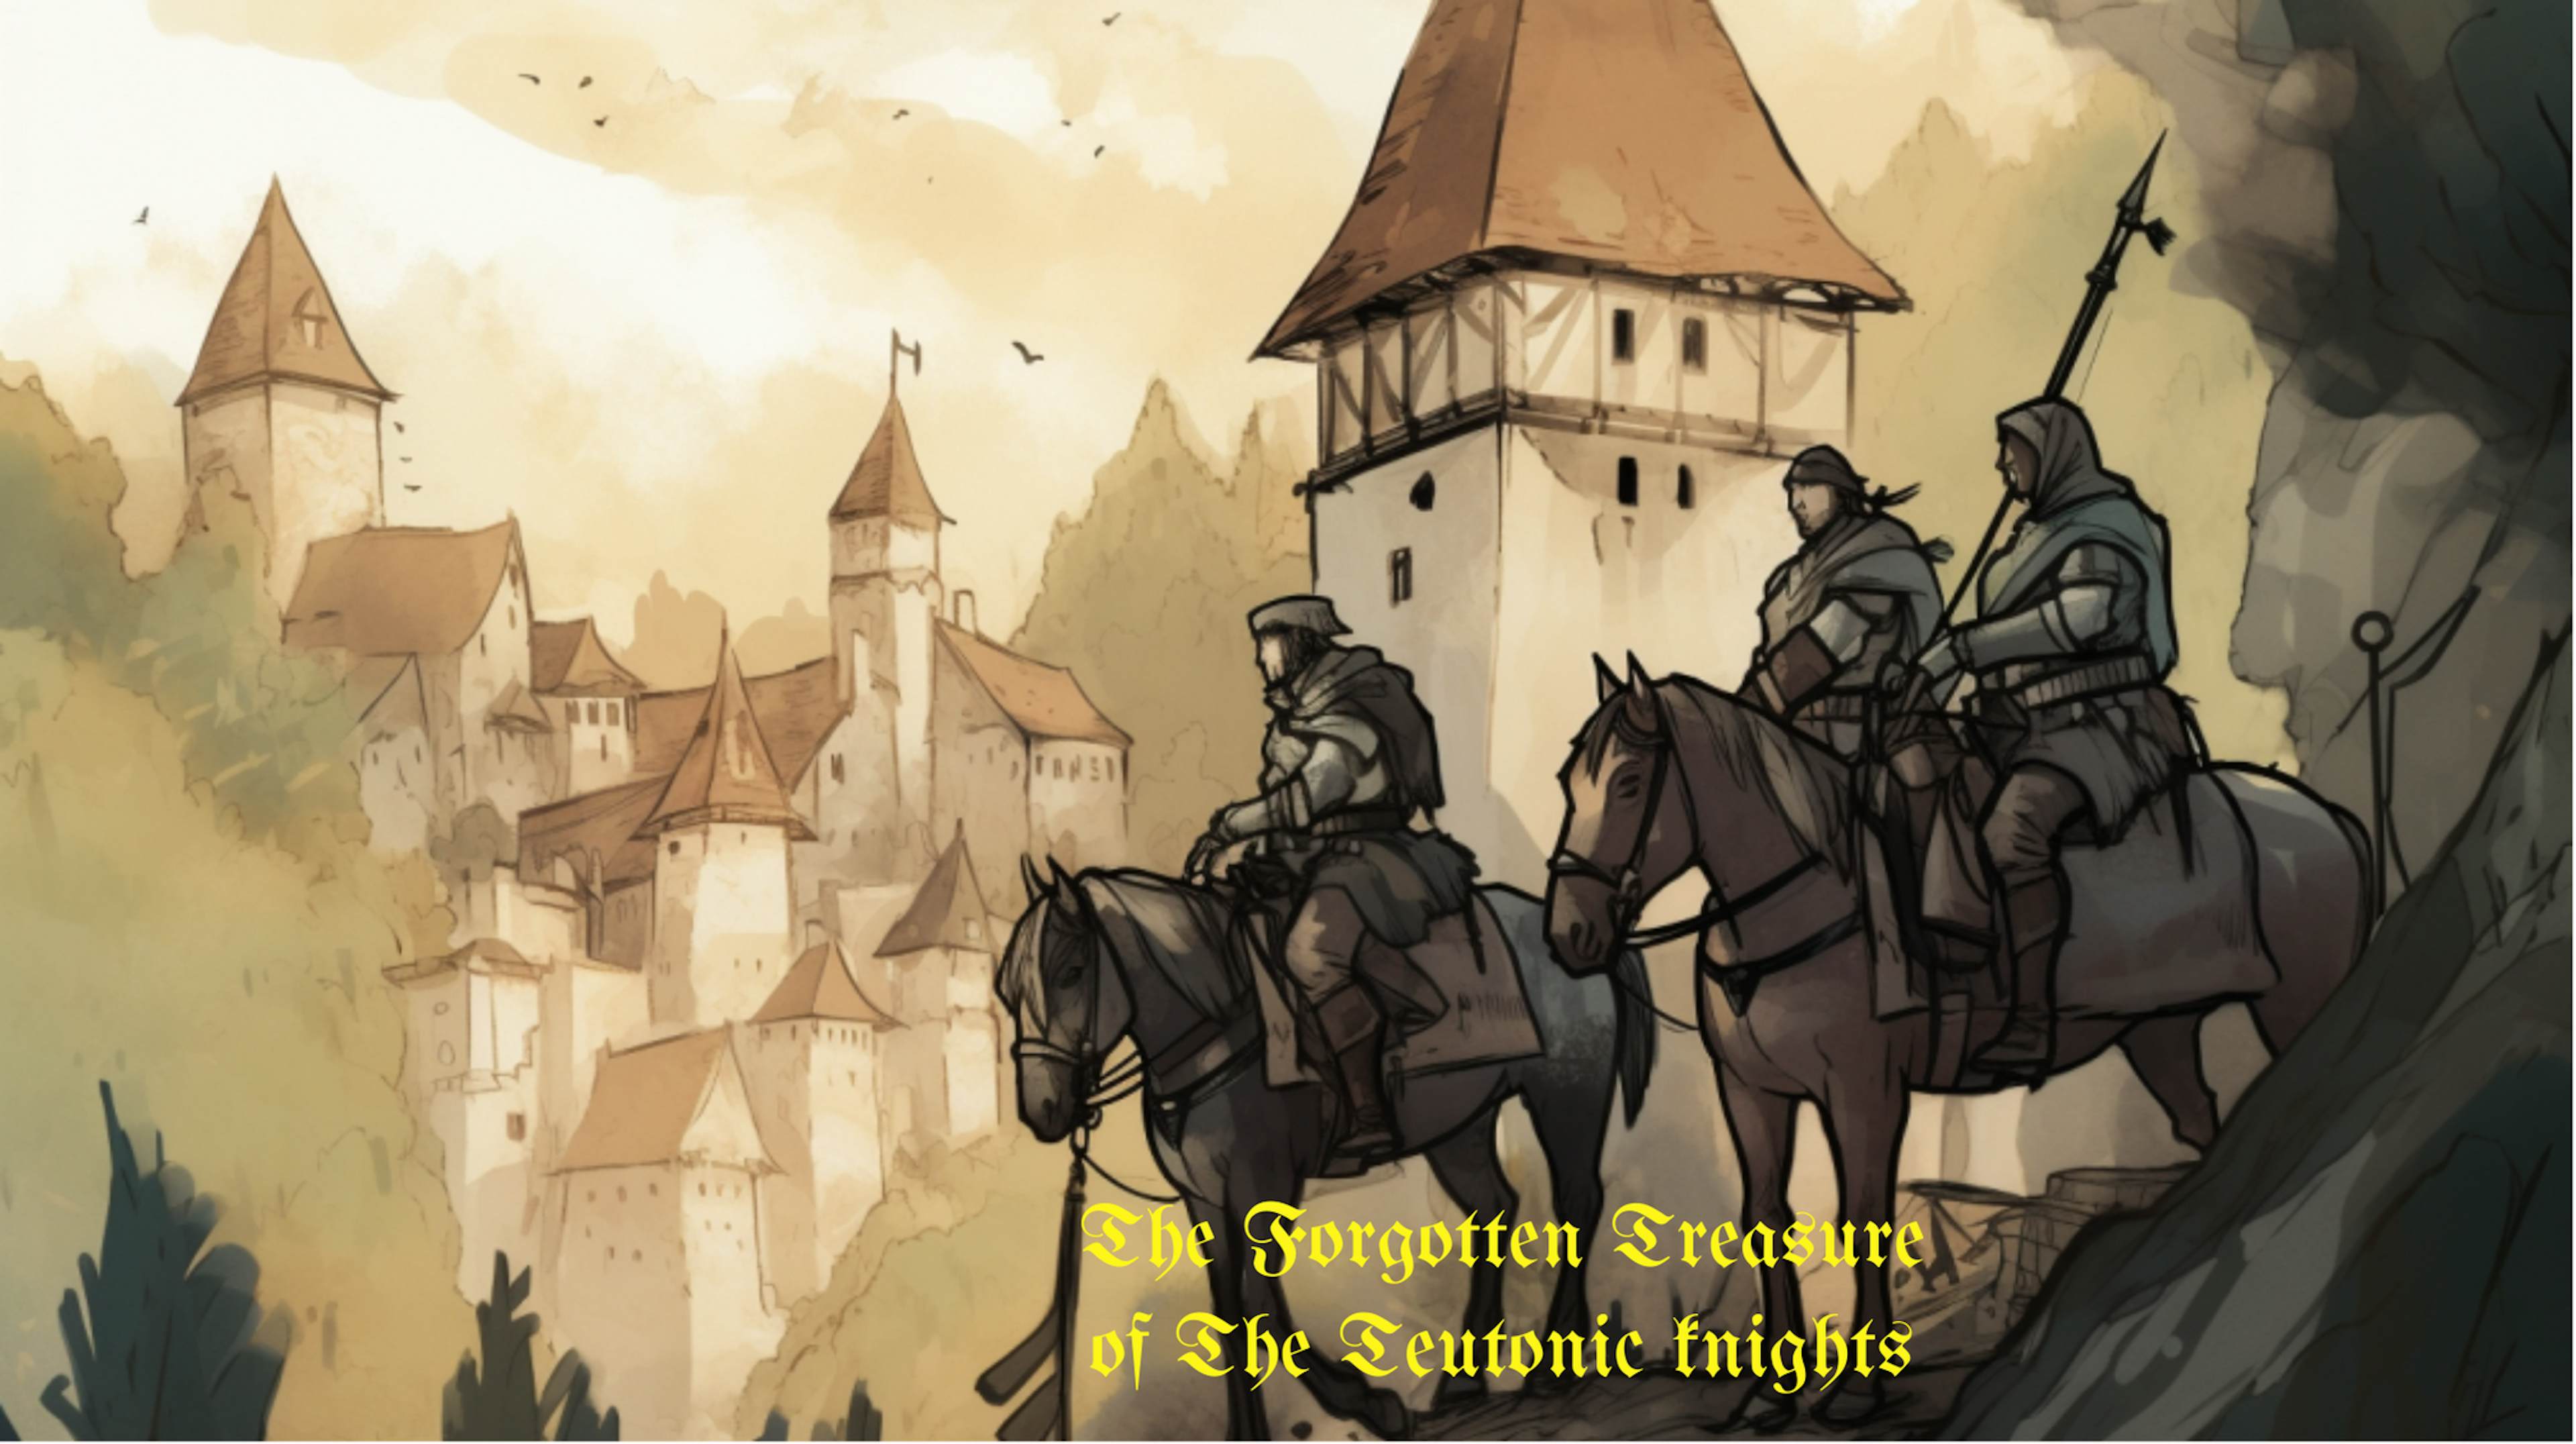 The Forgotten Treasure Of The Teutonic Knights, Brasov image